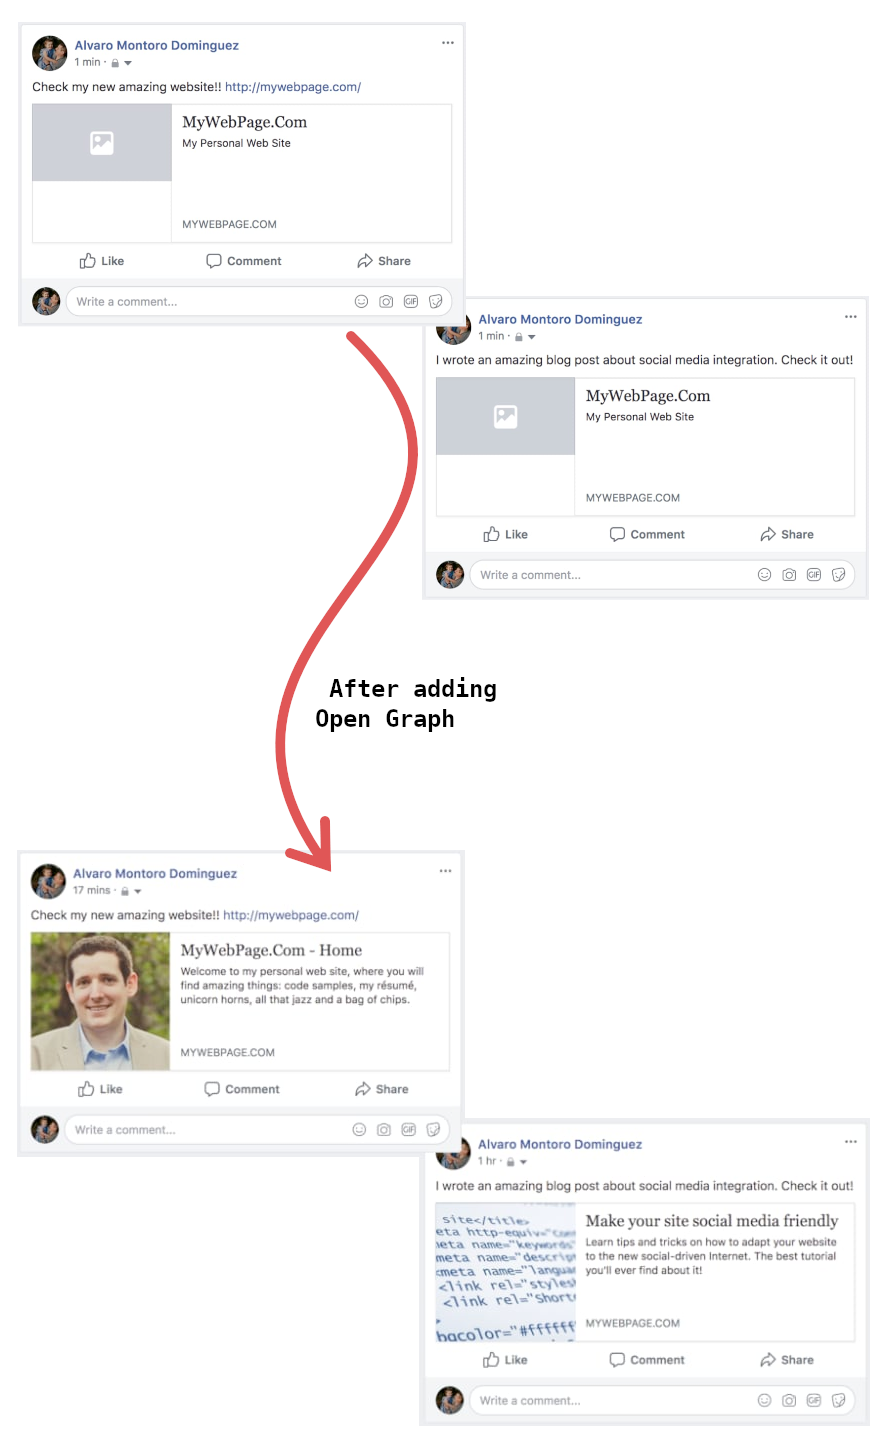 Facebook cards before and after adding Open Graph